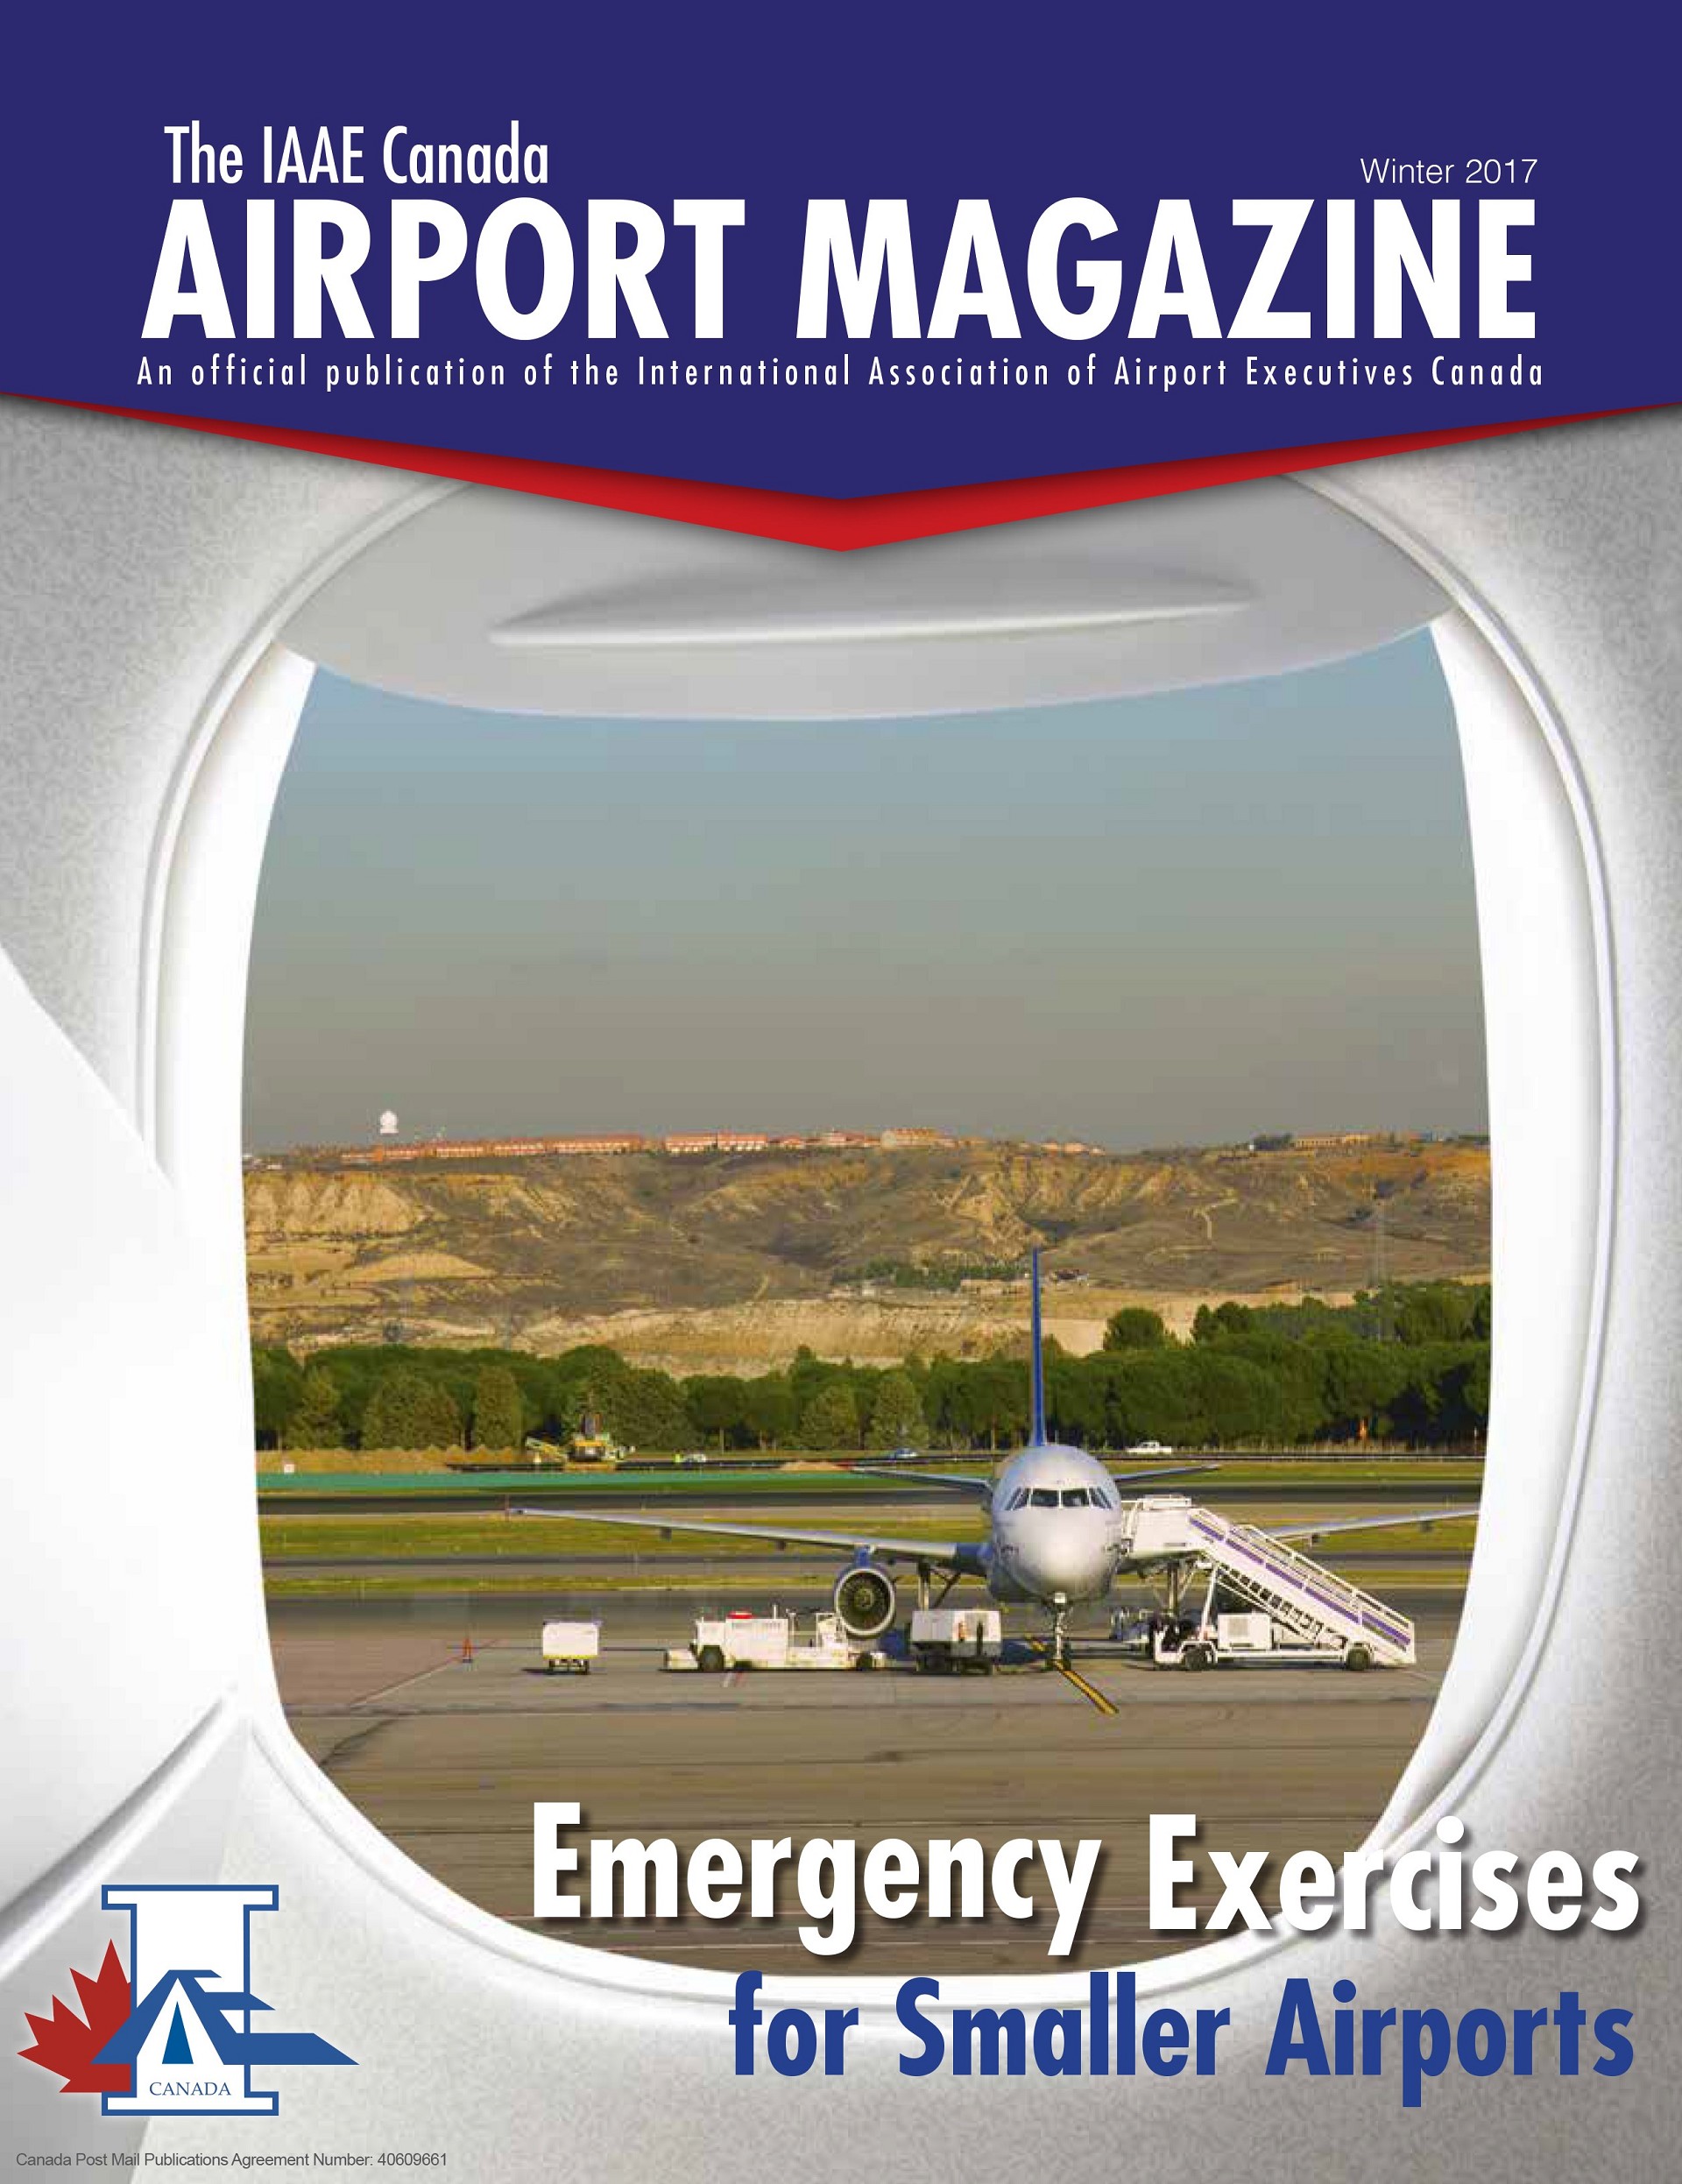 winter 2017, emergency exercises for smaller airports